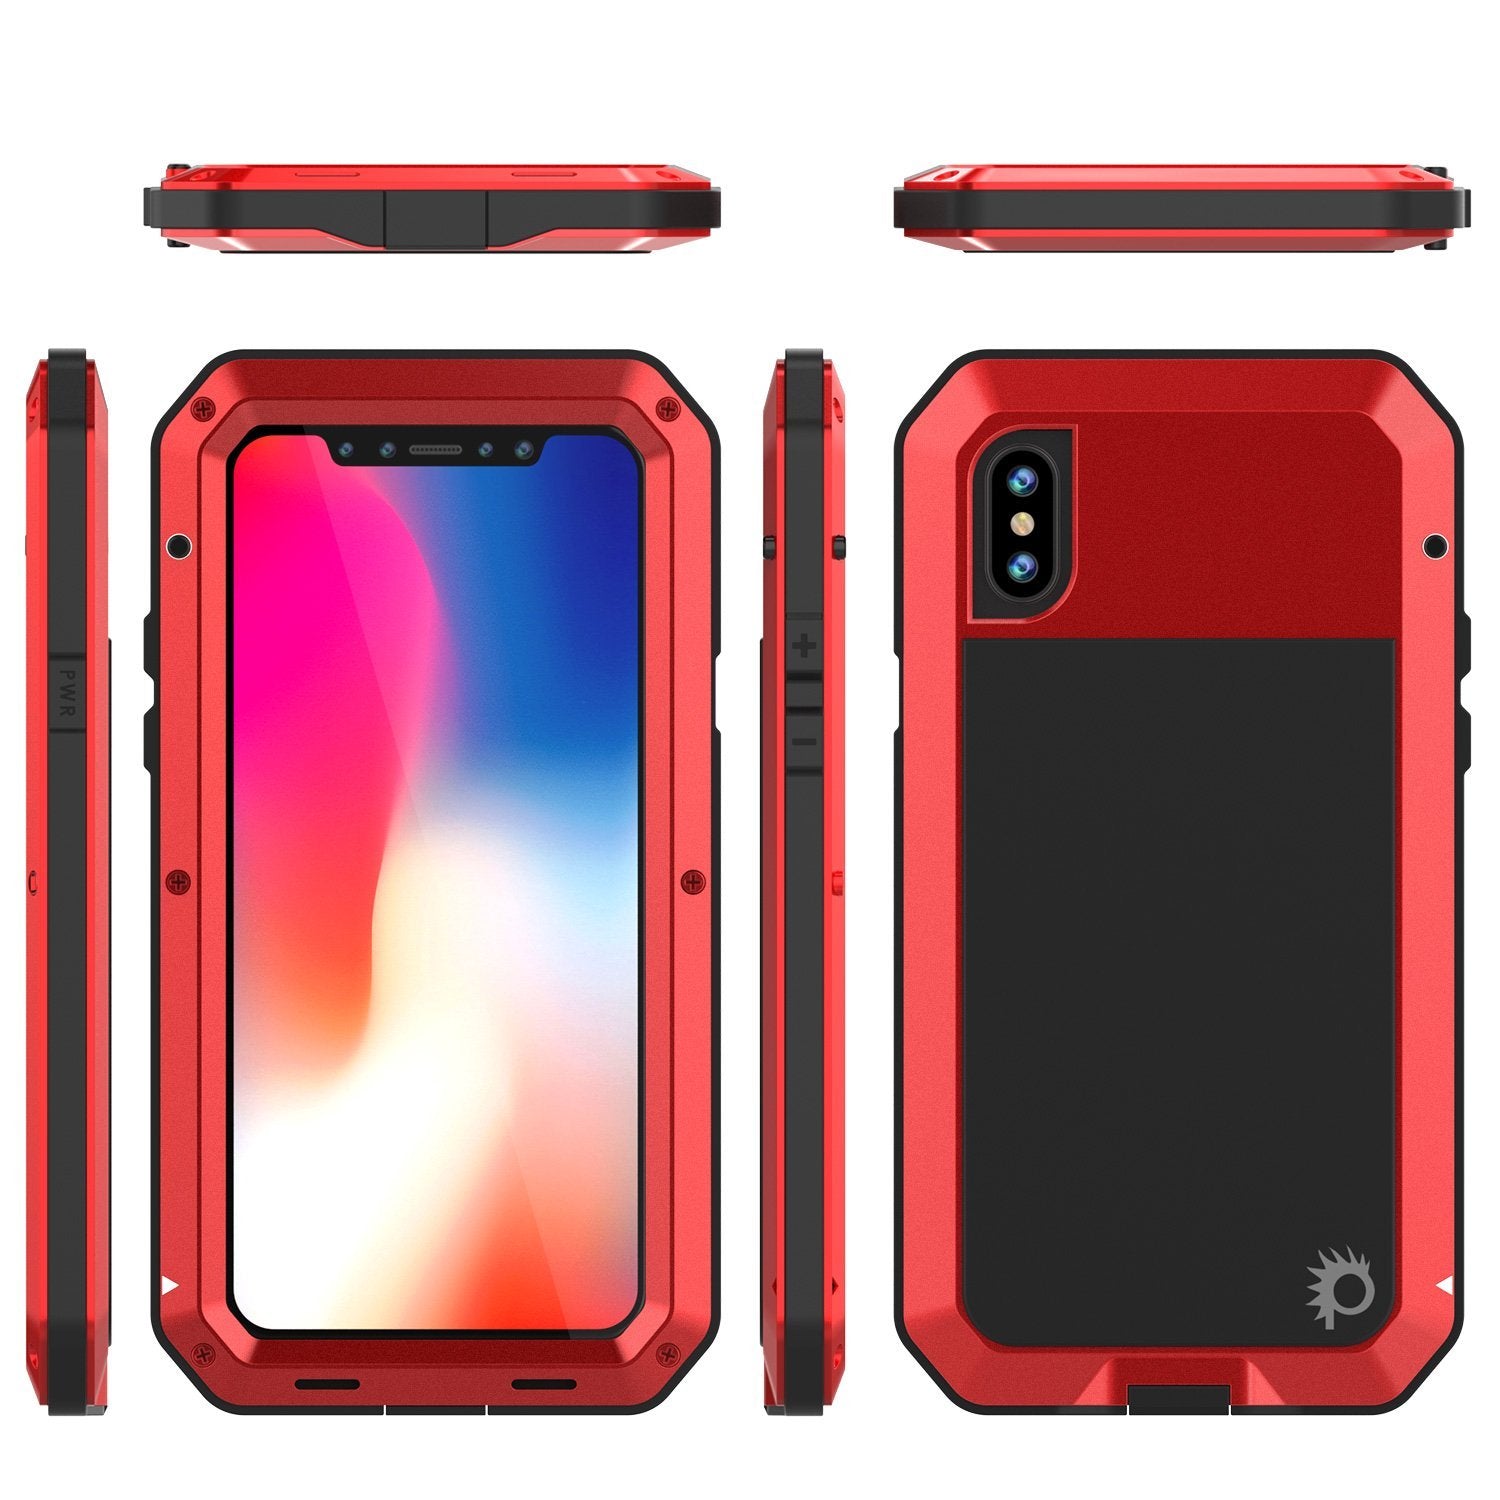 iPhone XR Metal Case, Heavy Duty Military Grade Armor Cover [shock proof] Full Body Hard [Red]